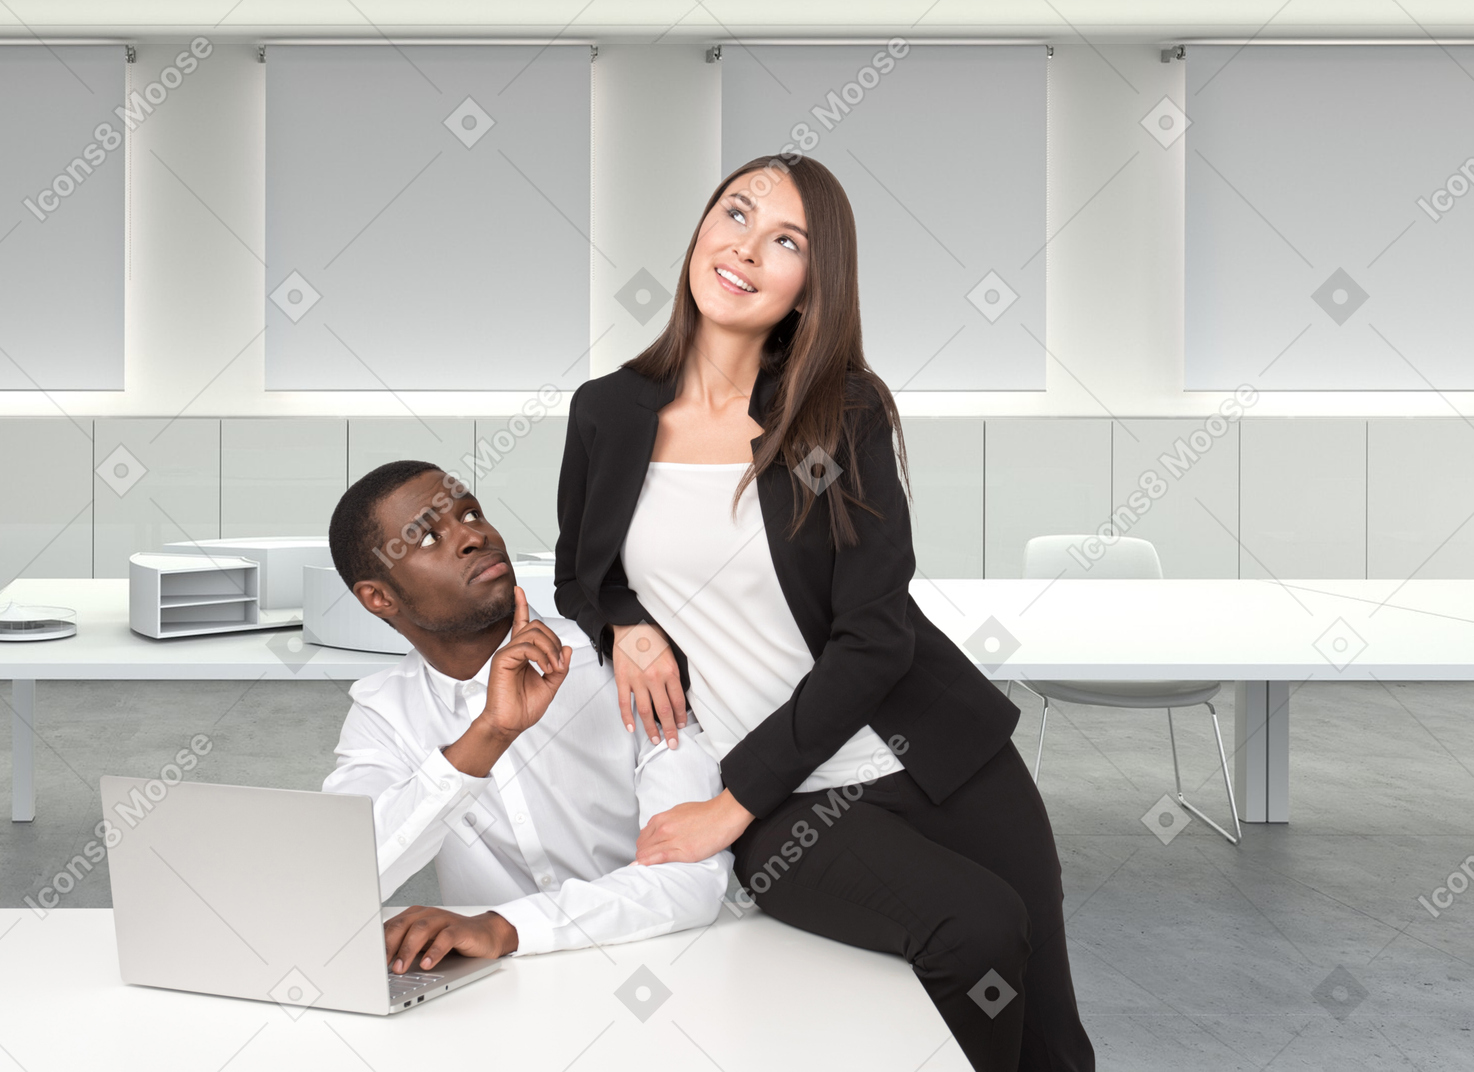 A man sitting behind the desk with laptop and woman sitting on top of the desk